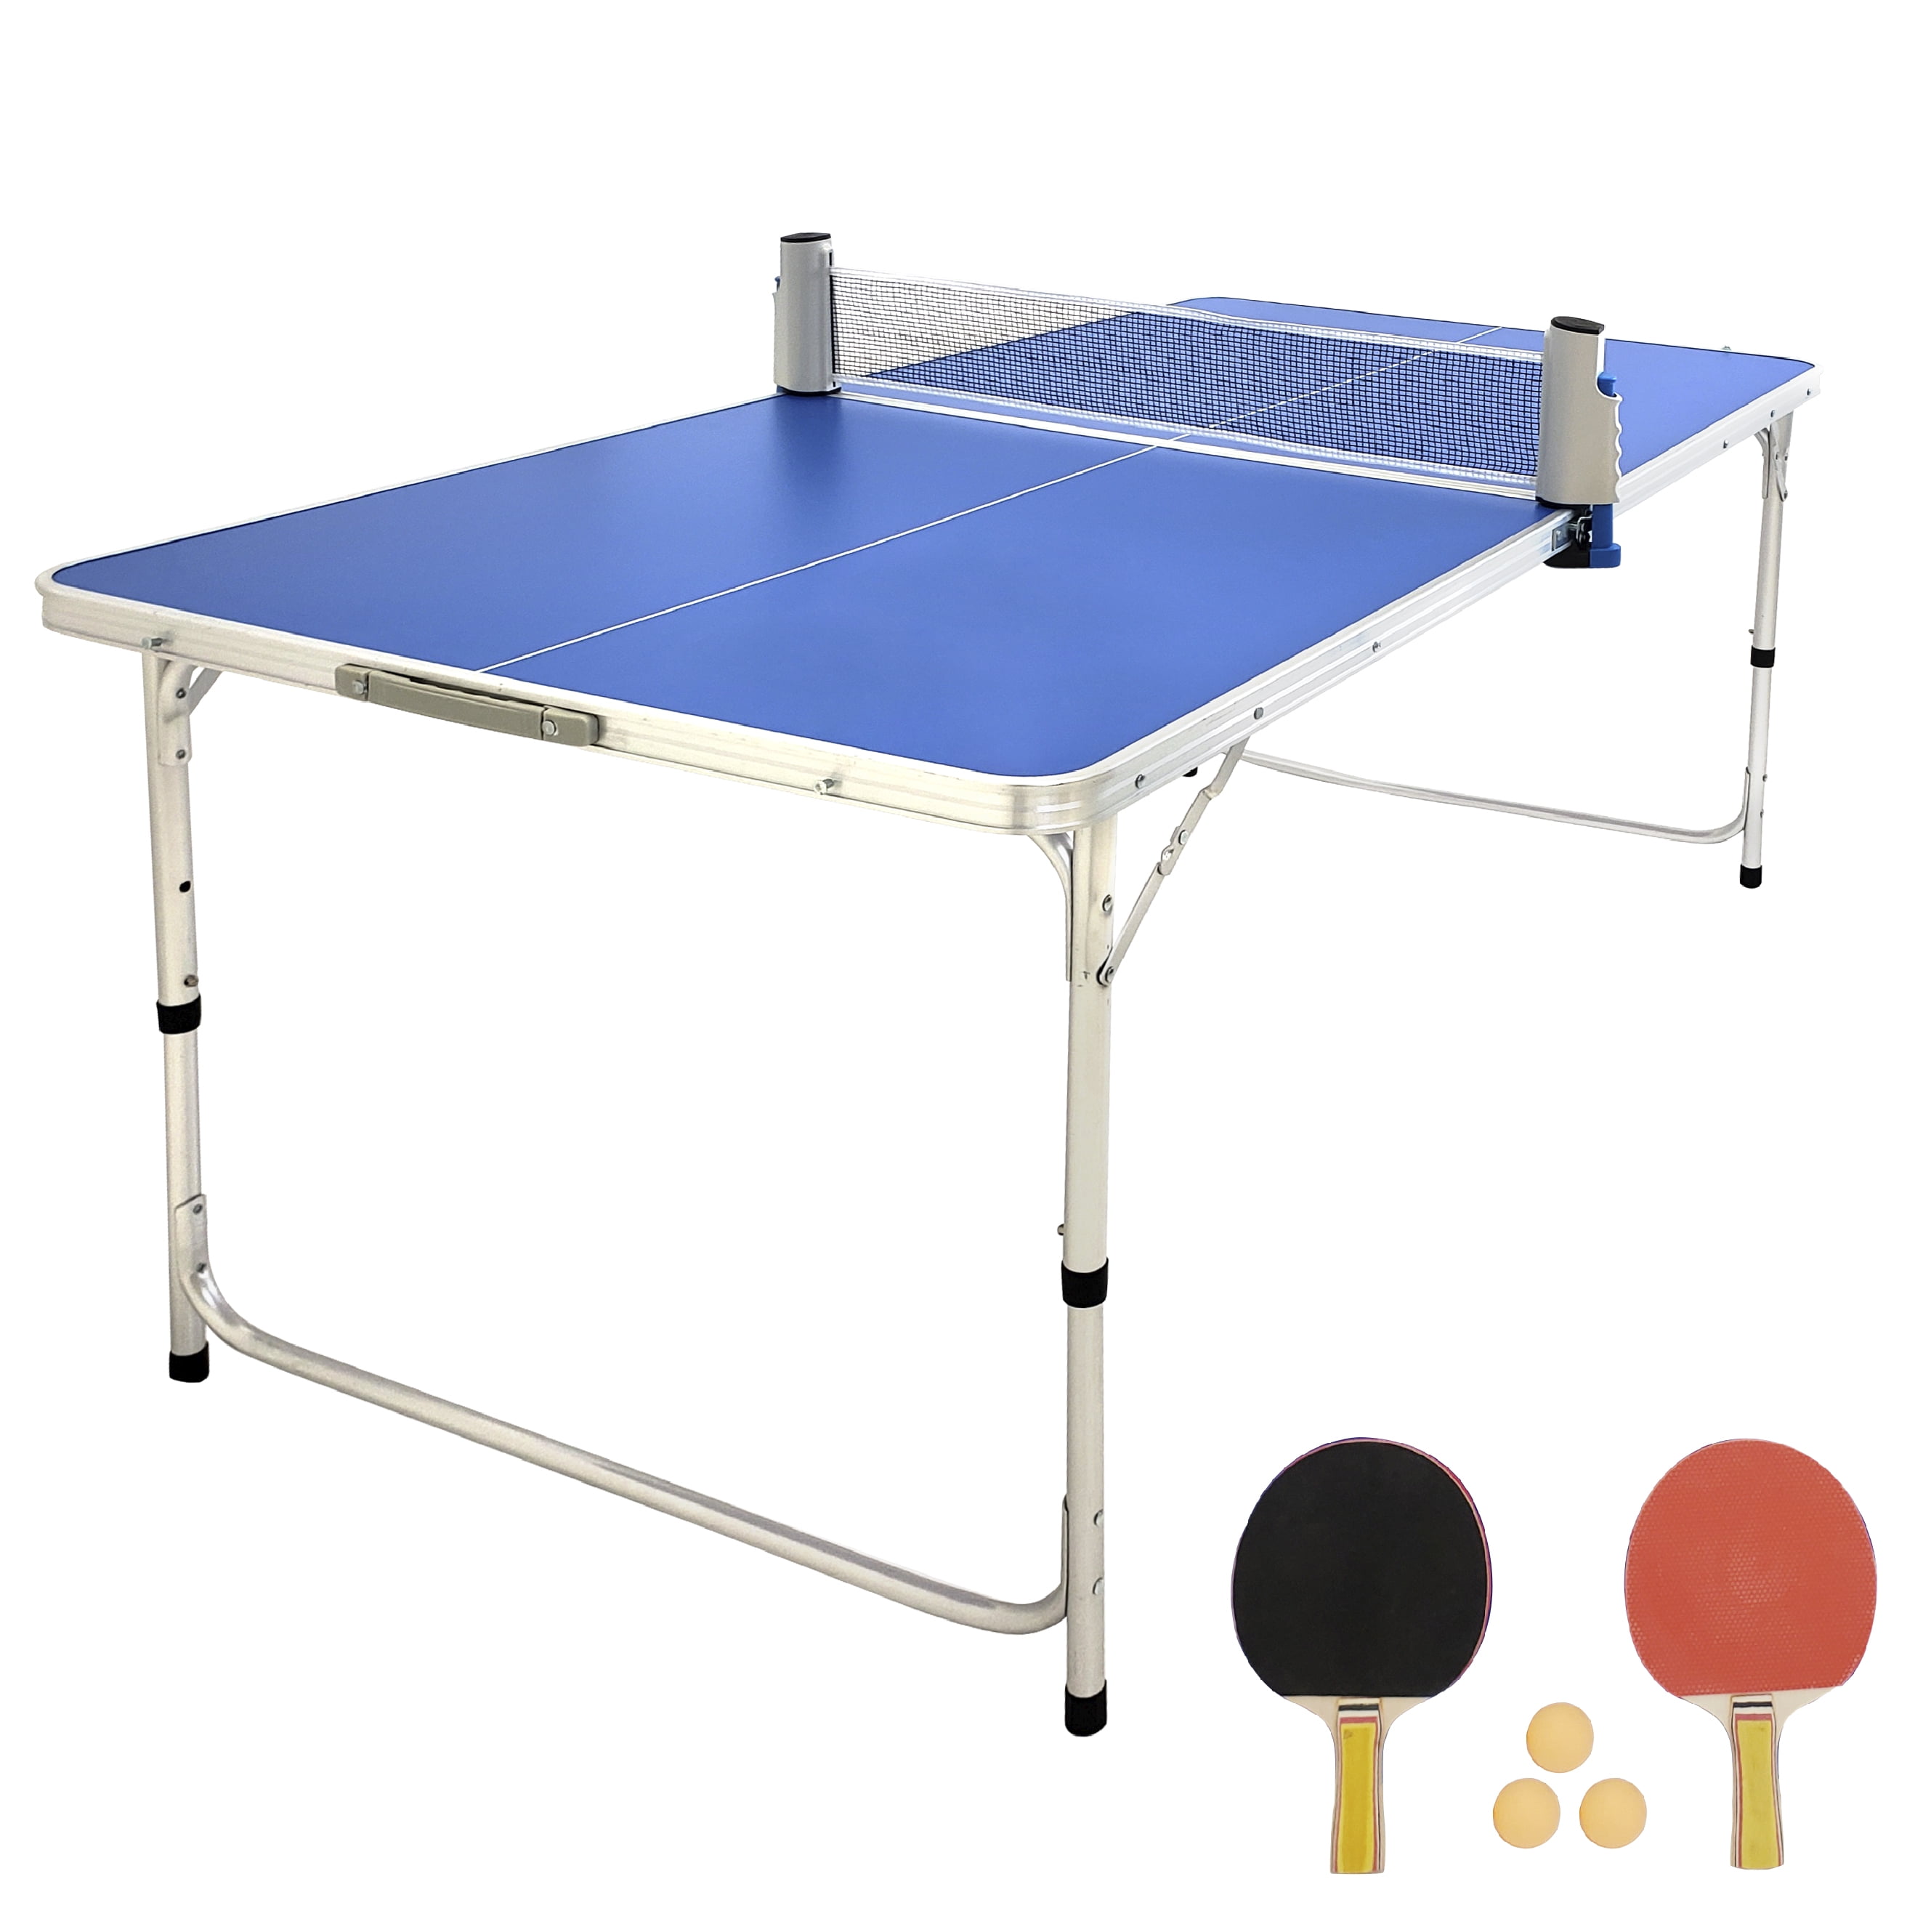 All-in-one Ping Pong Set 2 paddle Table Tennis Net 3 balls for Indoor Games 